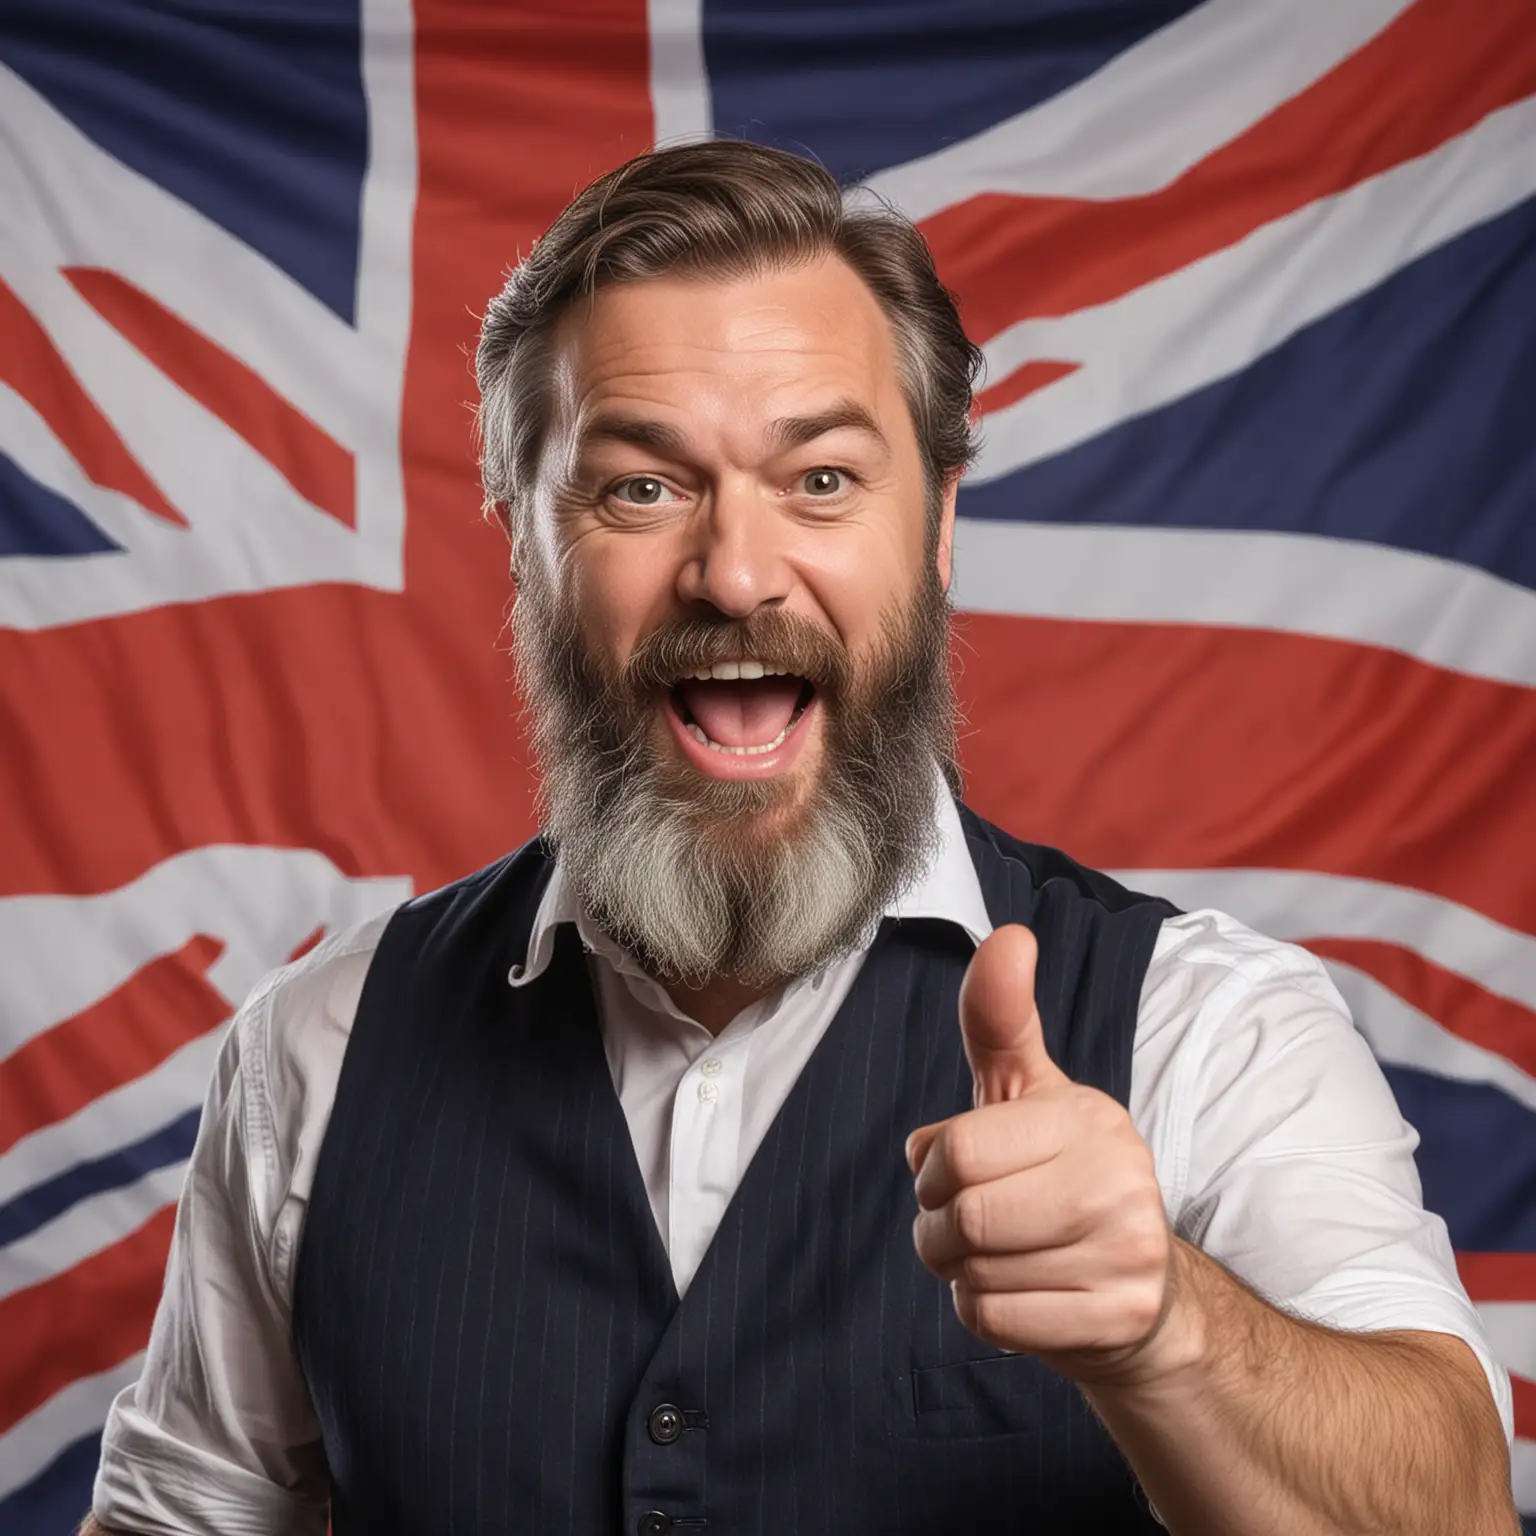 British FlagThemed Success Celebration with MiddleAged Man